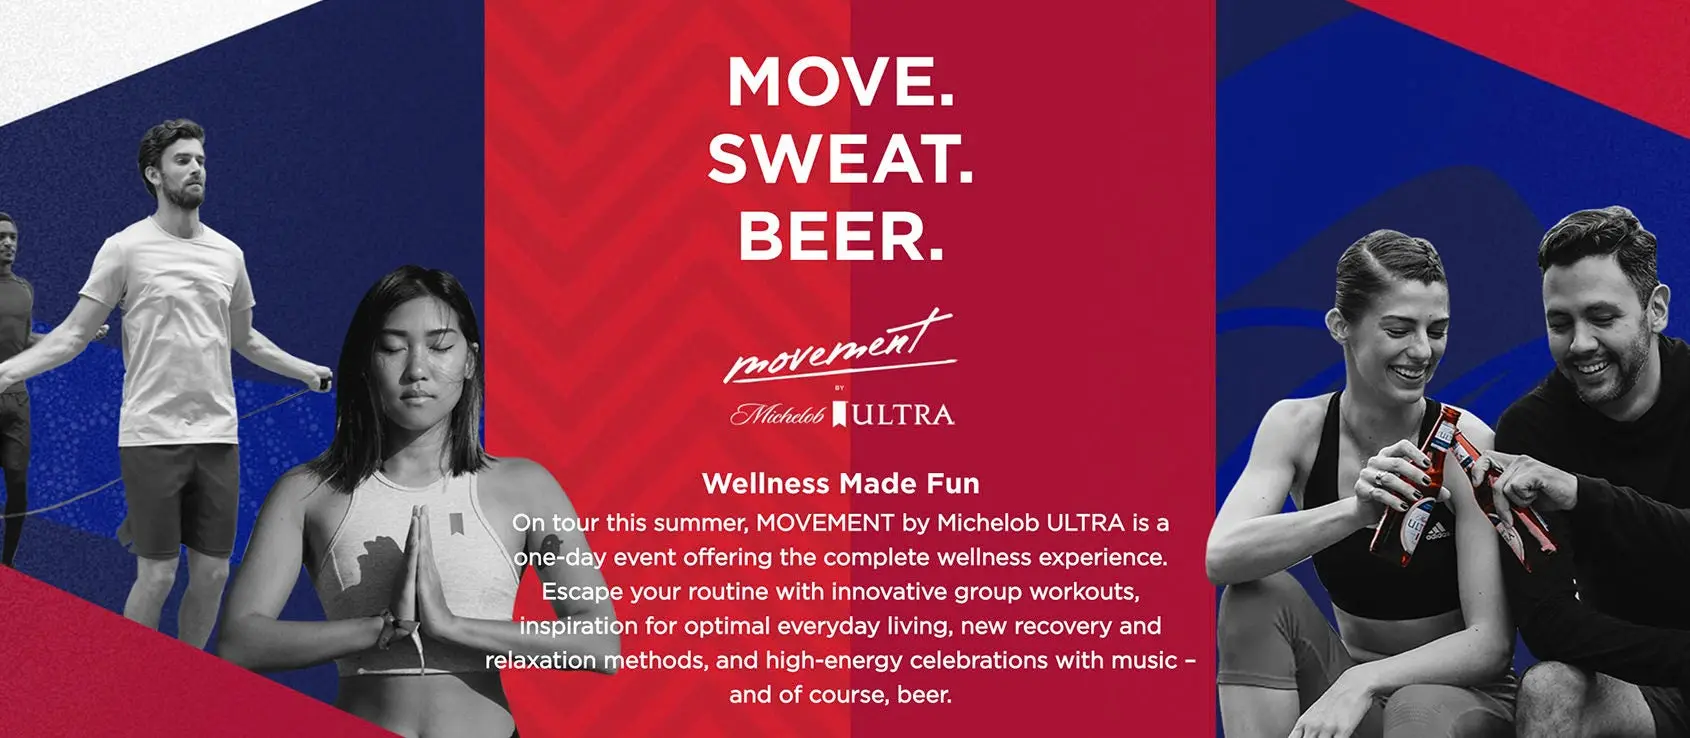 Move. Sweat. Beer. Ad for Michelob event.